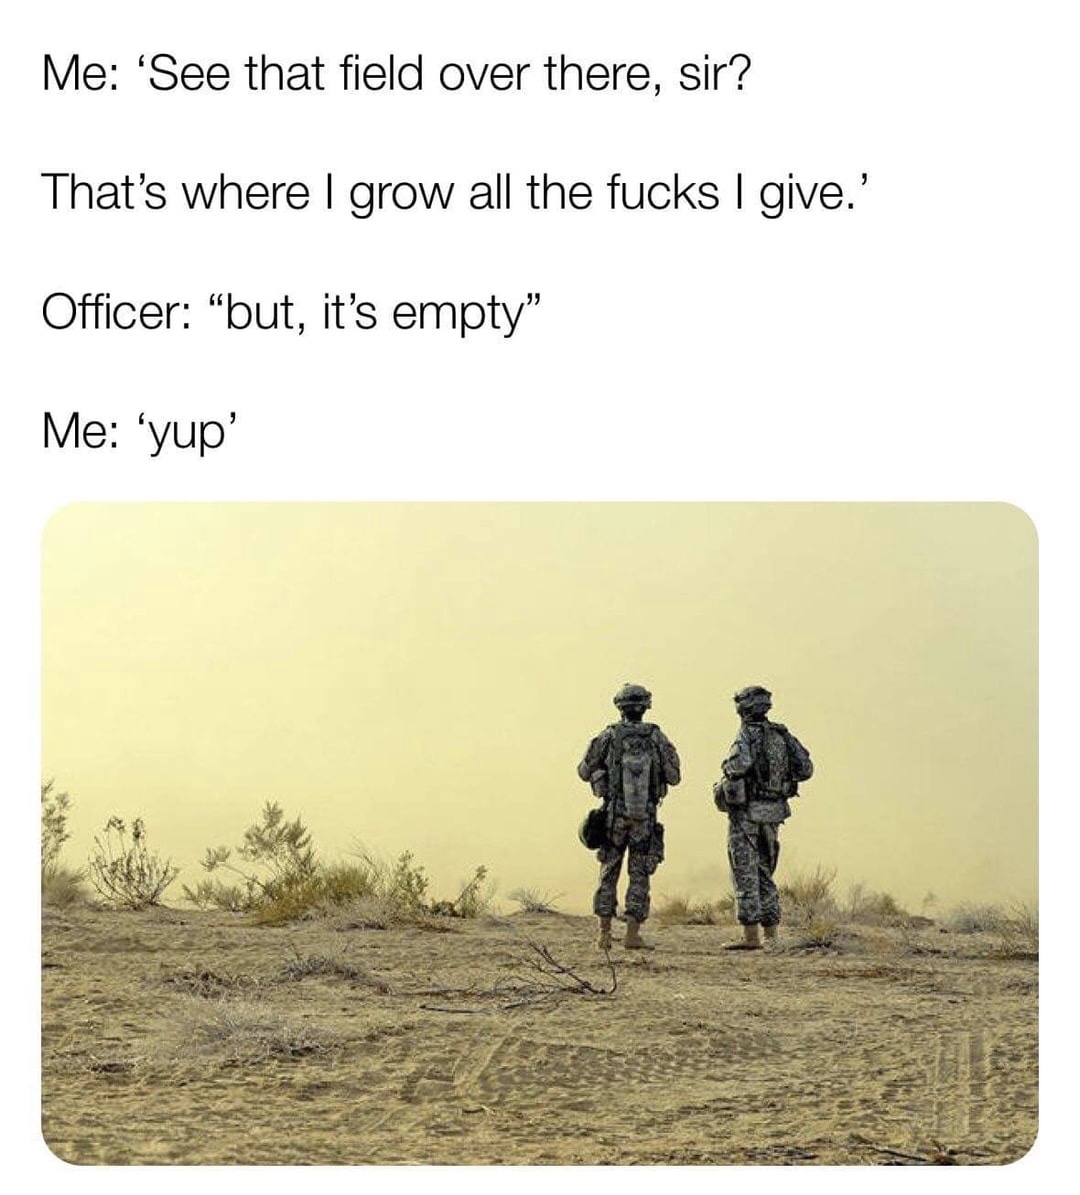 memes - army environment - Me 'See that field over there, sir? That's where I grow all the fucks I give.' Officer "but, it's empty" Me 'yup'